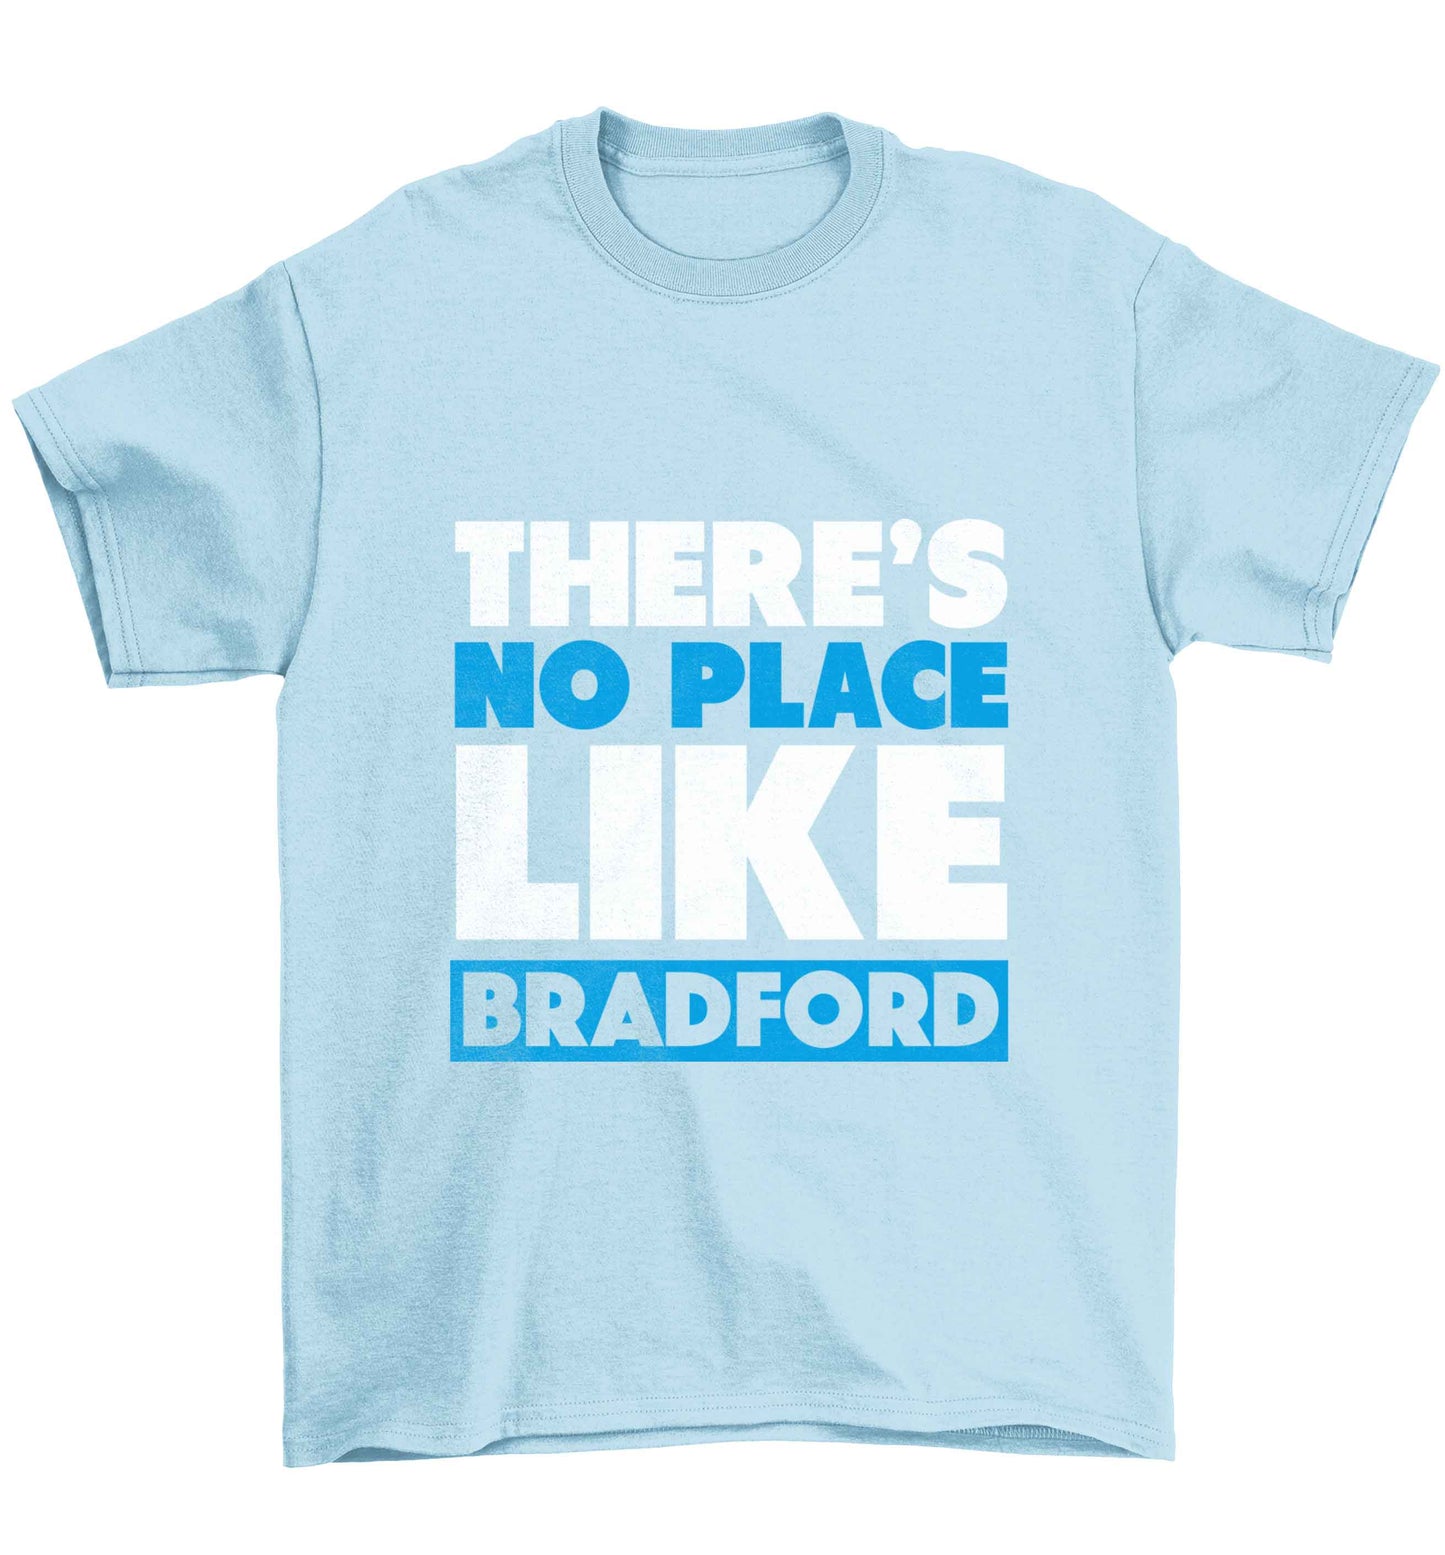 There's no place like Bradford Children's light blue Tshirt 12-13 Years